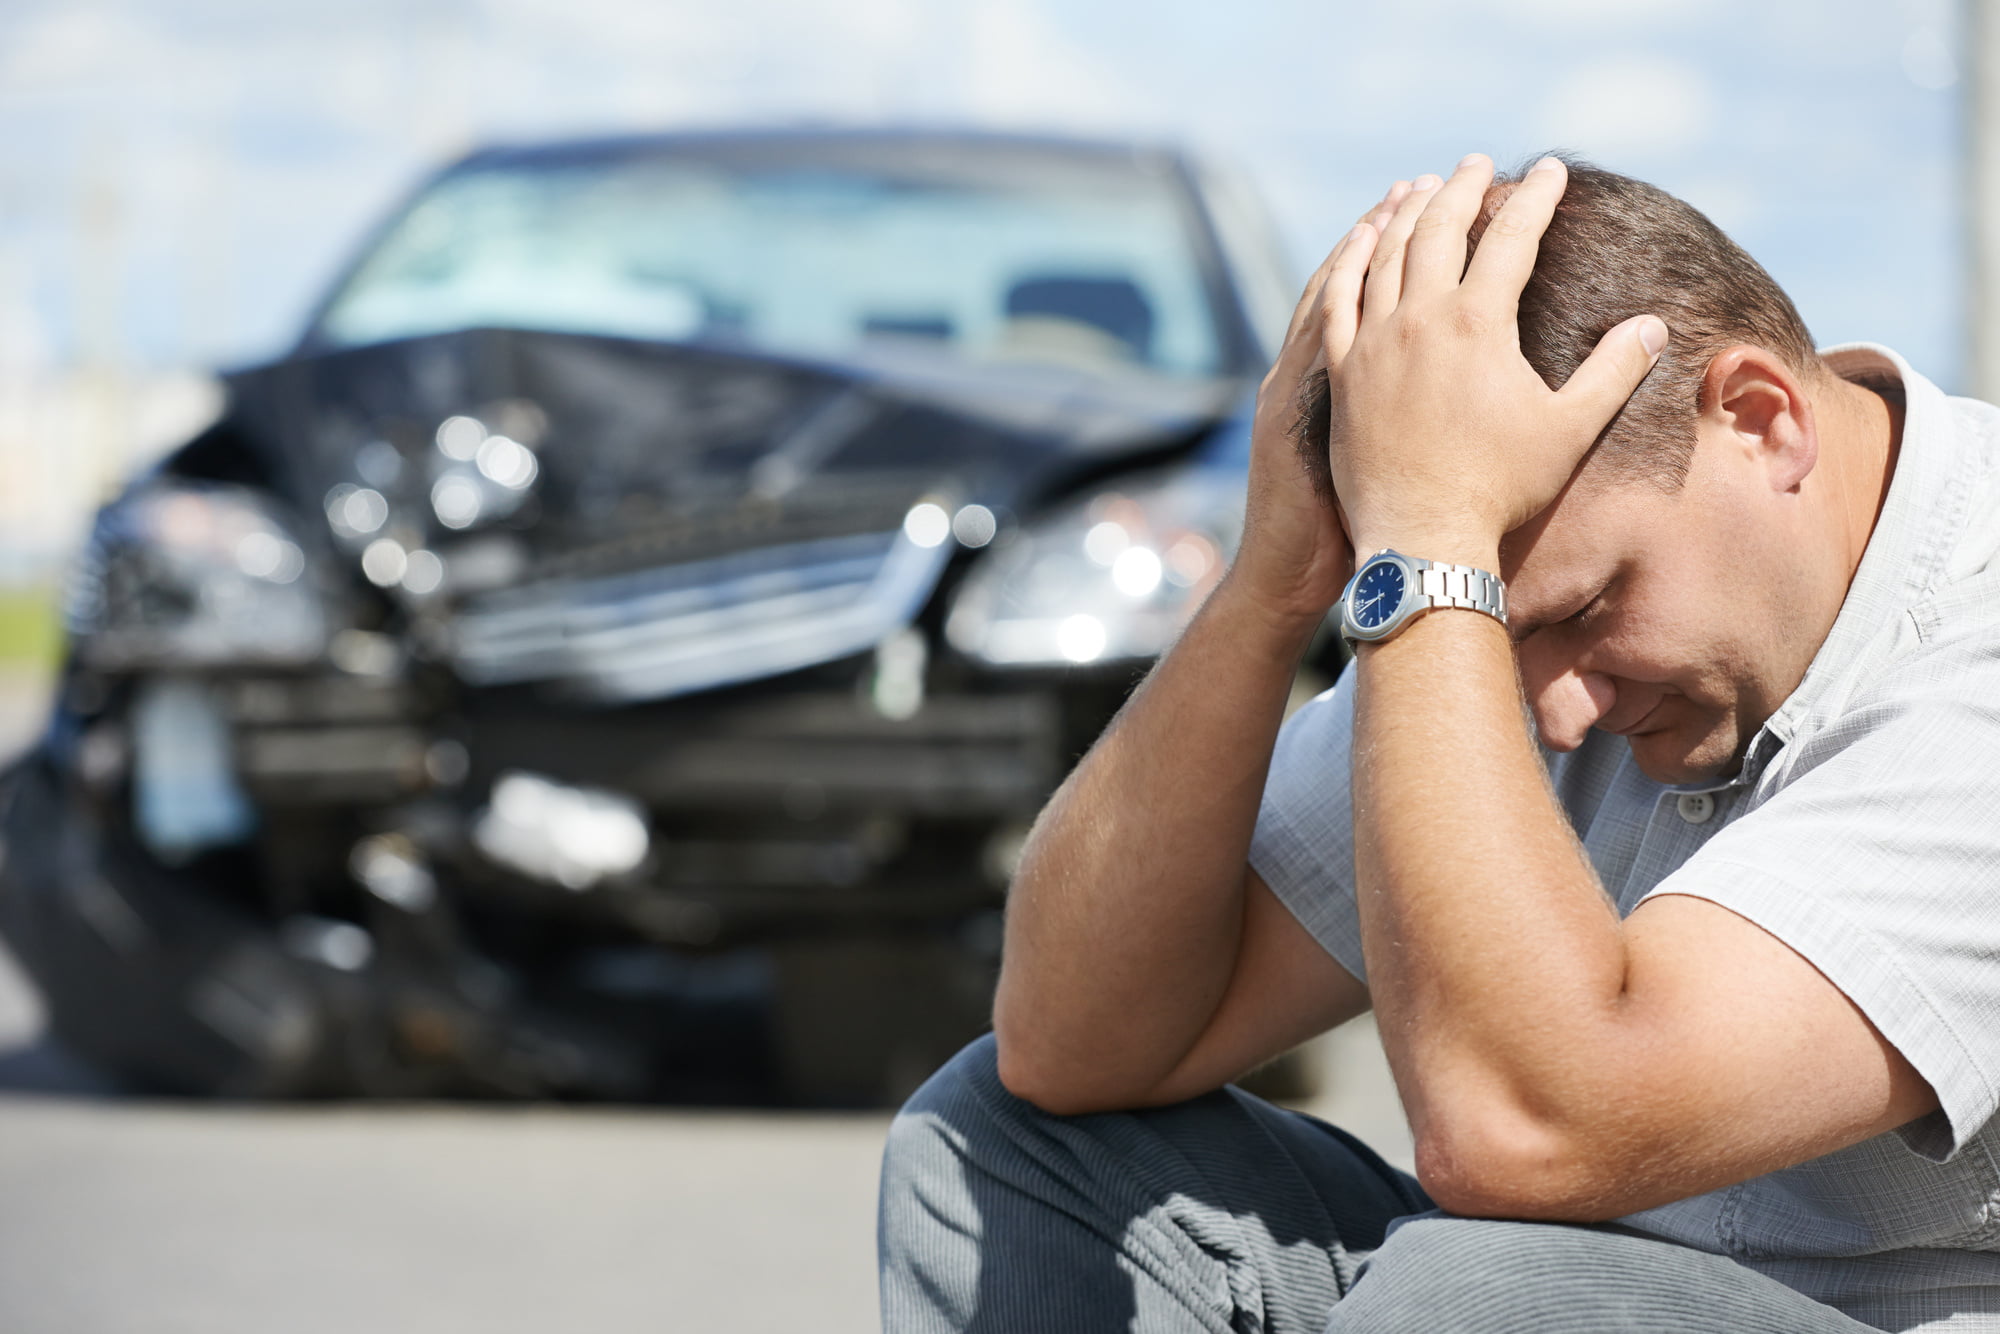 In order to prevent auto accidents, you should first understand why they happen. This guide breaks down the causes of car accidents.